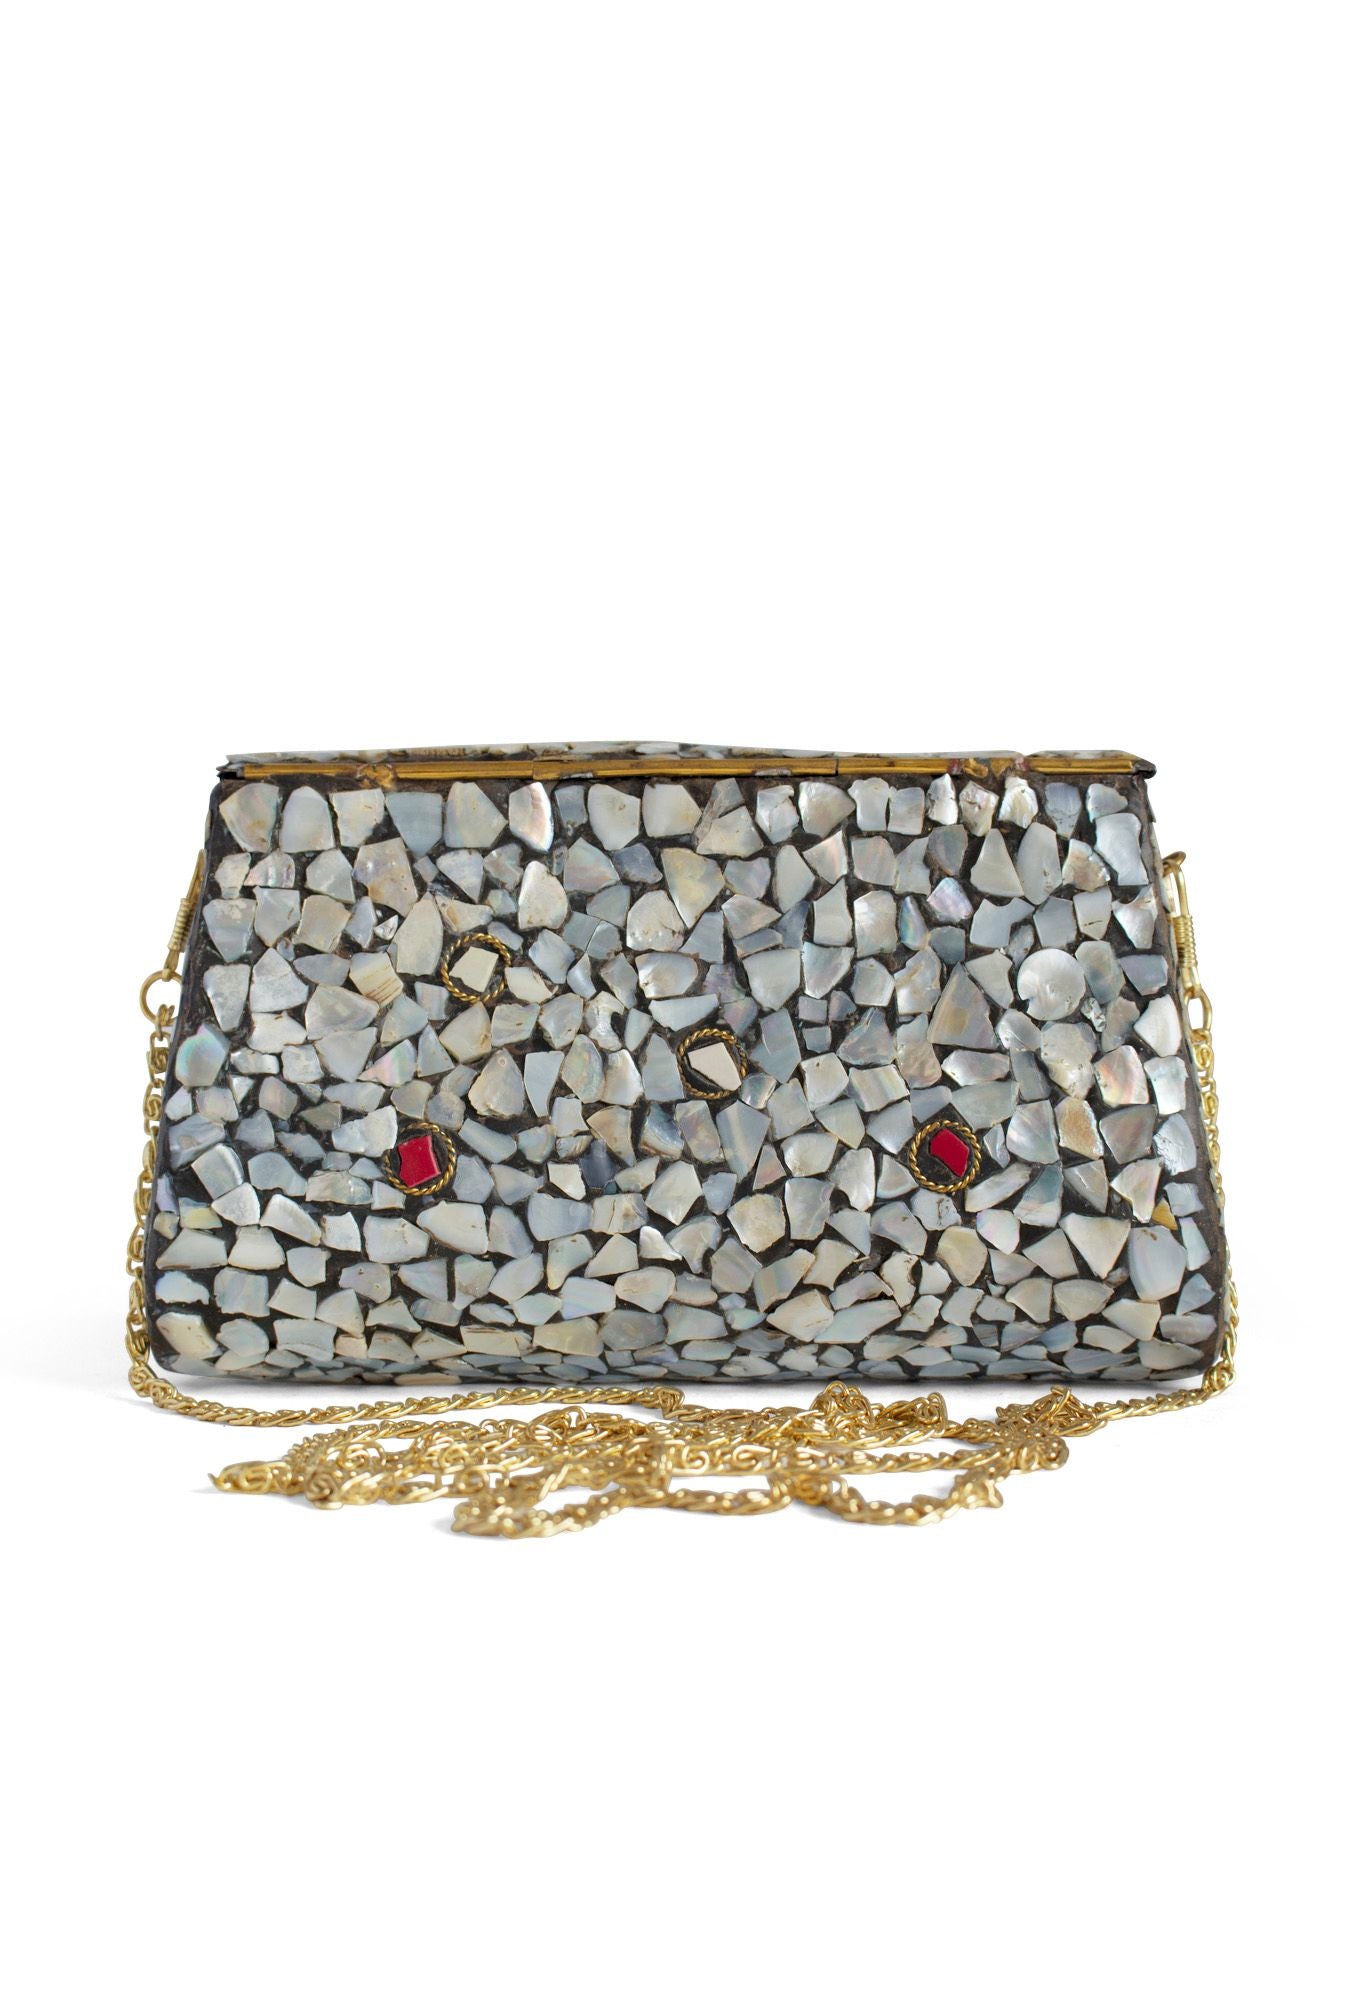 Multi-colored Stone Purse with Metal Inlay